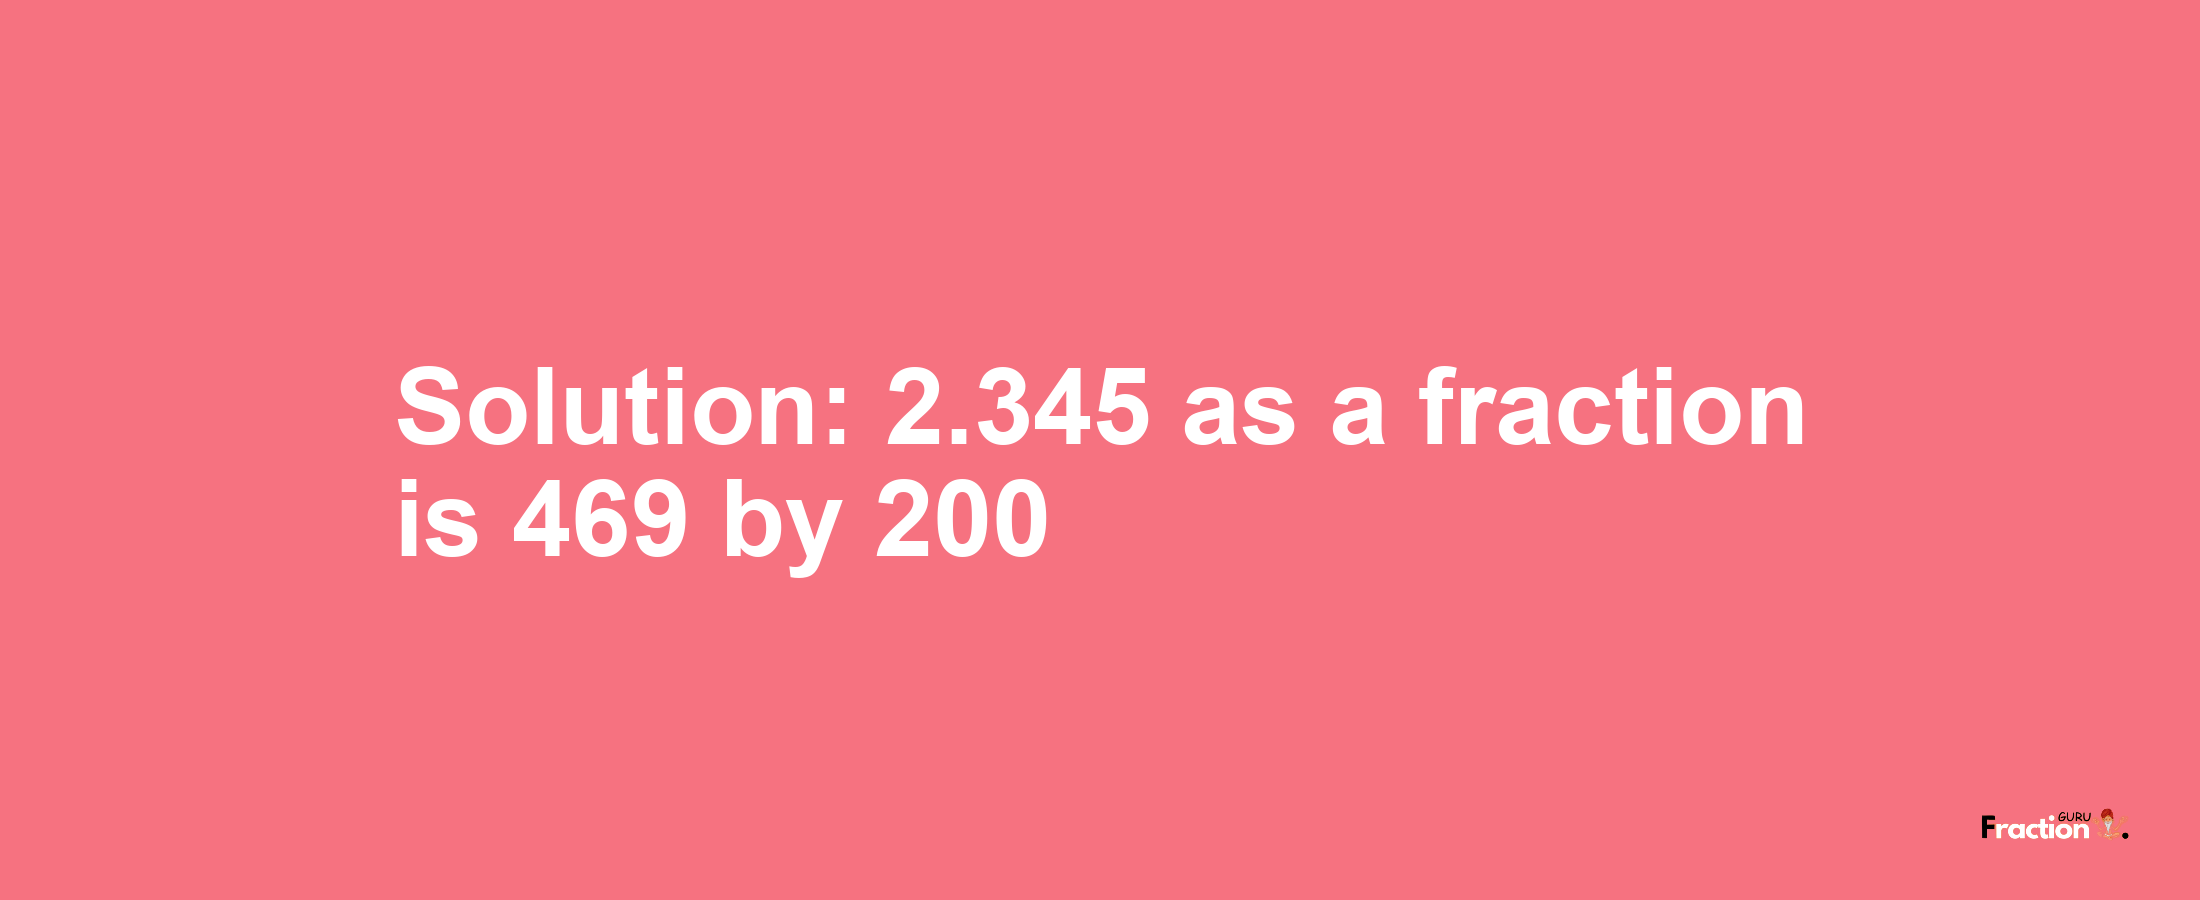 Solution:2.345 as a fraction is 469/200